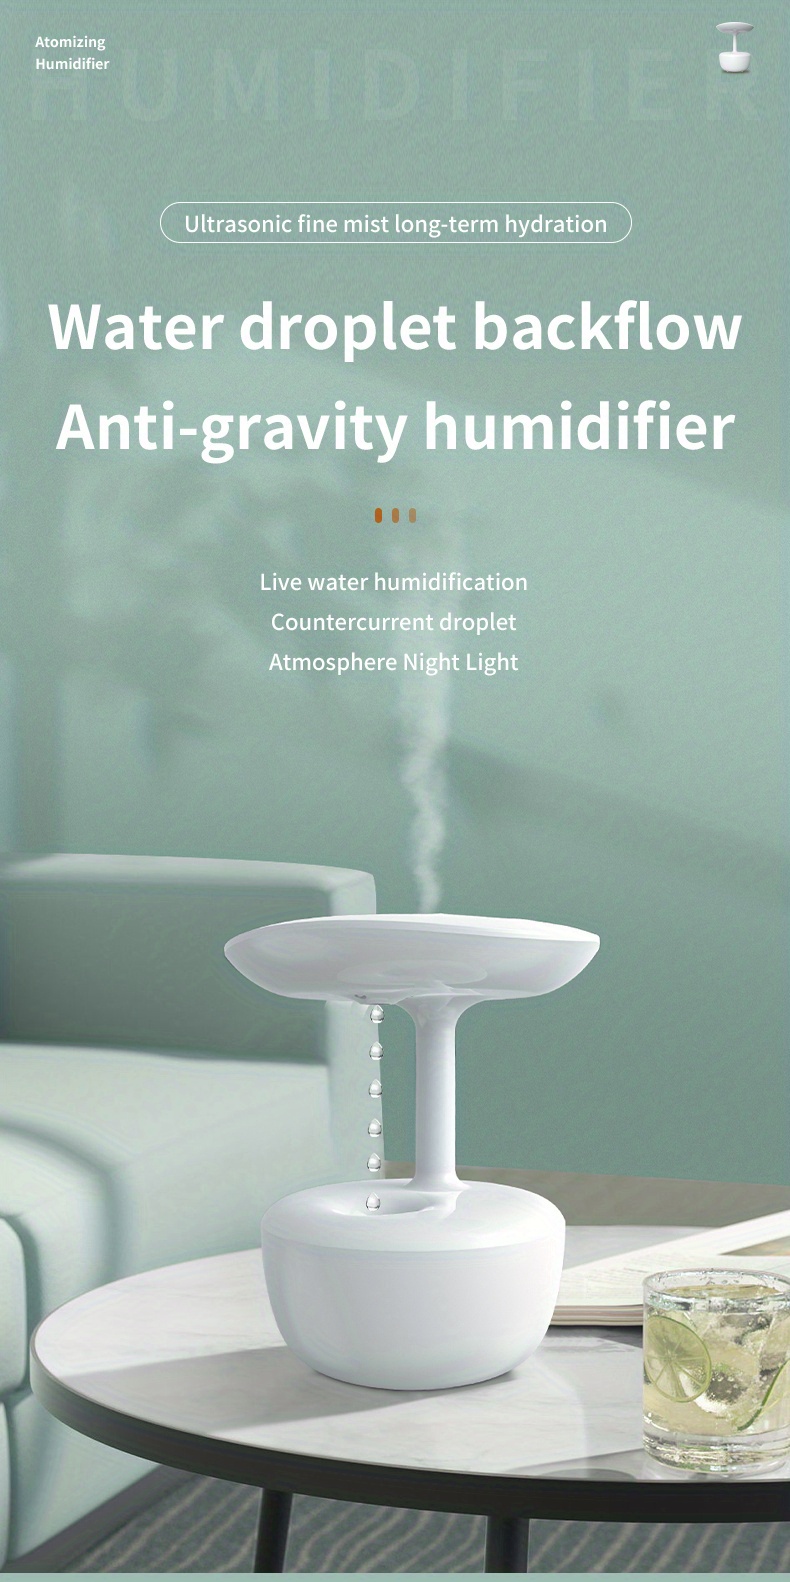 anti gravity water drop humidifier 700ml large capacity smart spray humidifier keep the air moist all day long creative water droplet back flow design automatic stop function humidifier suitable for office living room and bedroom details 0